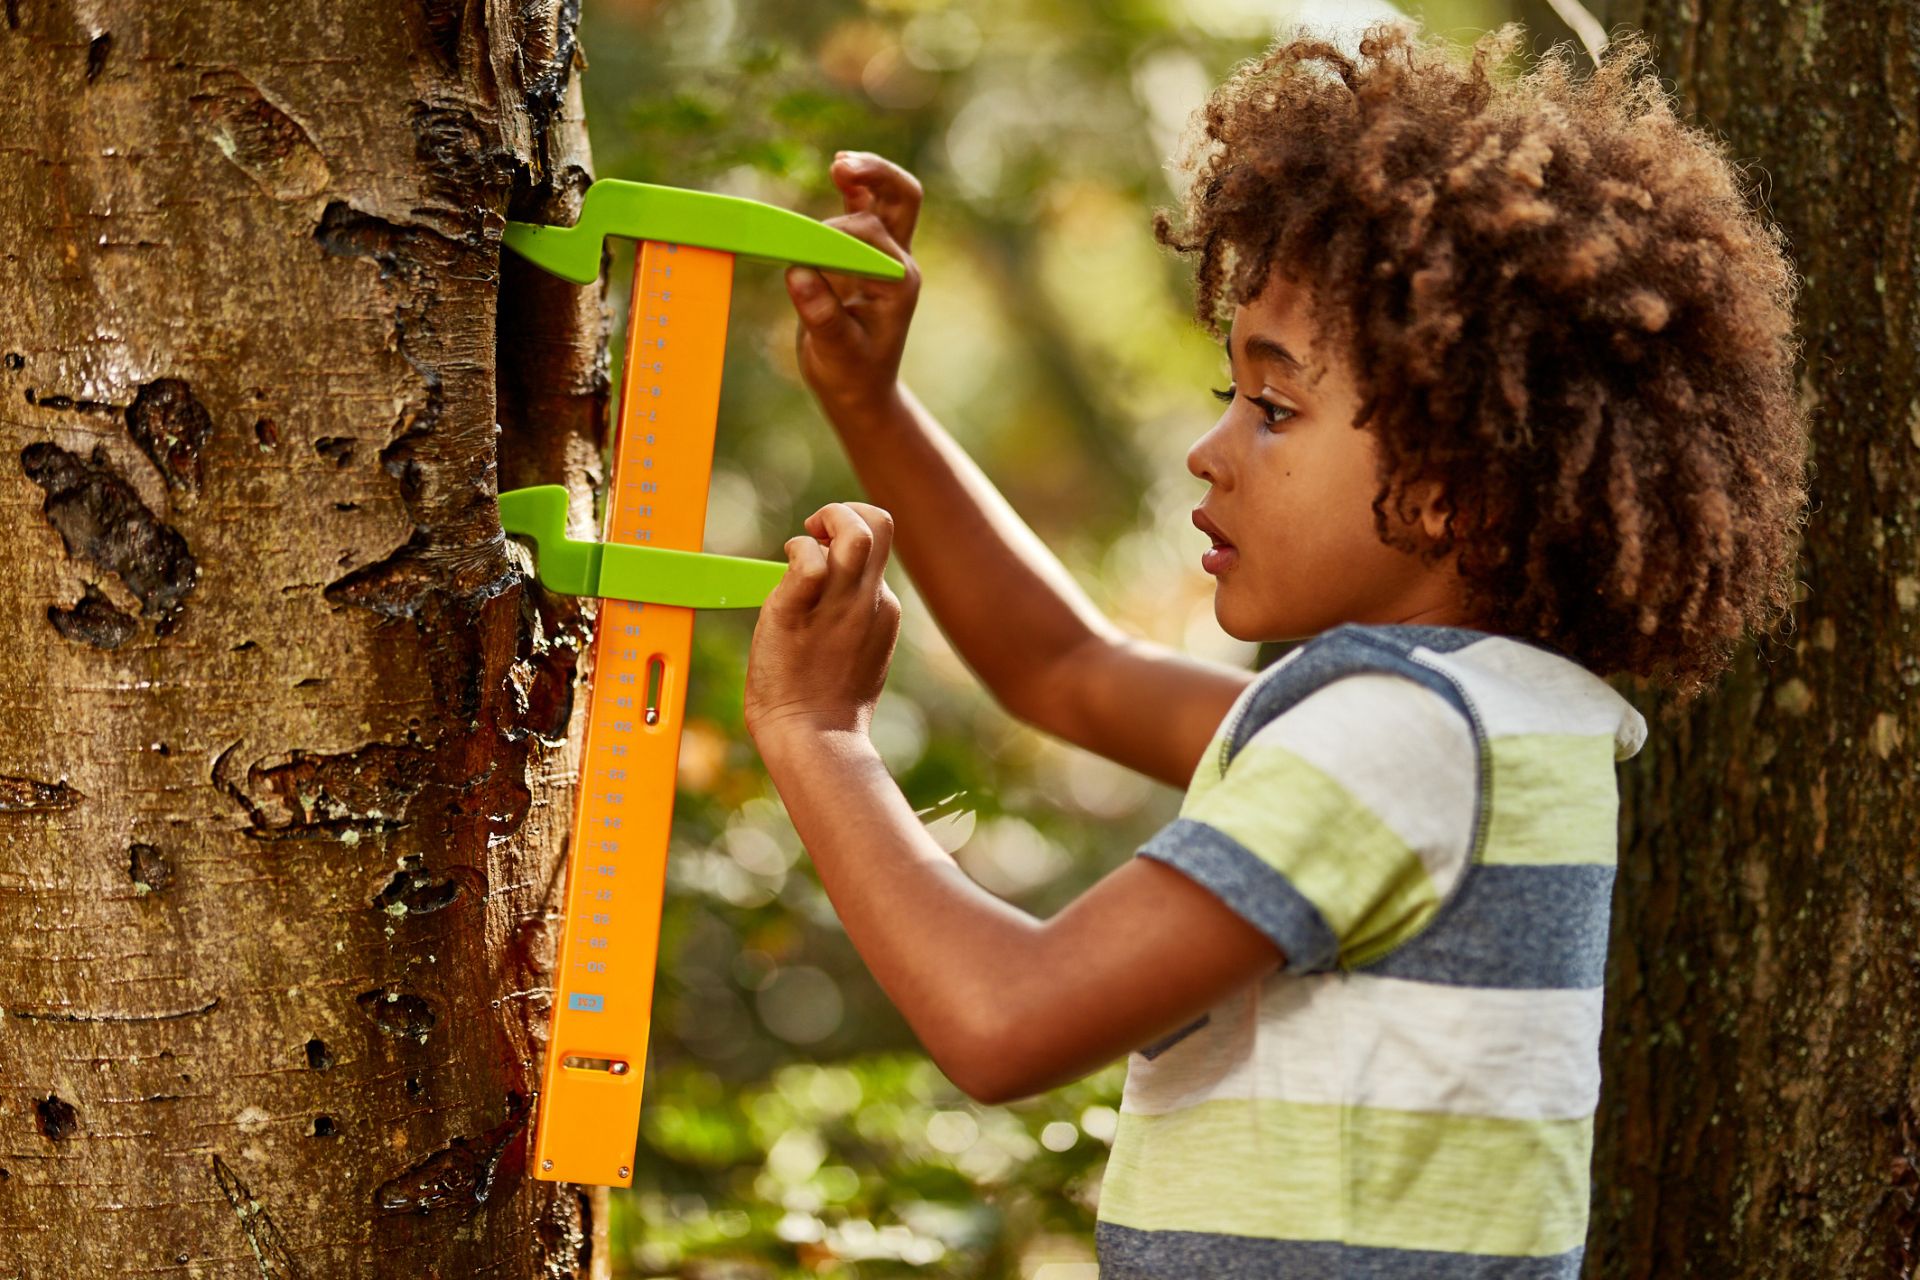 <p>                     This is a great option if you're after educational garden activities for kids. Award-winning company Learning Resources has a range of educational toys and games that will help kids learn through exploration with fun outdoor activities.                    </p>                                      <p>                     Budding young mathematicians will love this kit shown above, which will help 4-8 year-olds get their heads around measurement. As well as a vertical measure for freestanding objects, there are callipers to measure internal and external objects, a trundle wheel to measure distances (1 click = 1 metre), a spirit level, and a measuring stick.                    </p>                                      <p>                     Learning Resources also has free downloadable activity sheets and resources to help you make the most of the garden.                   </p>